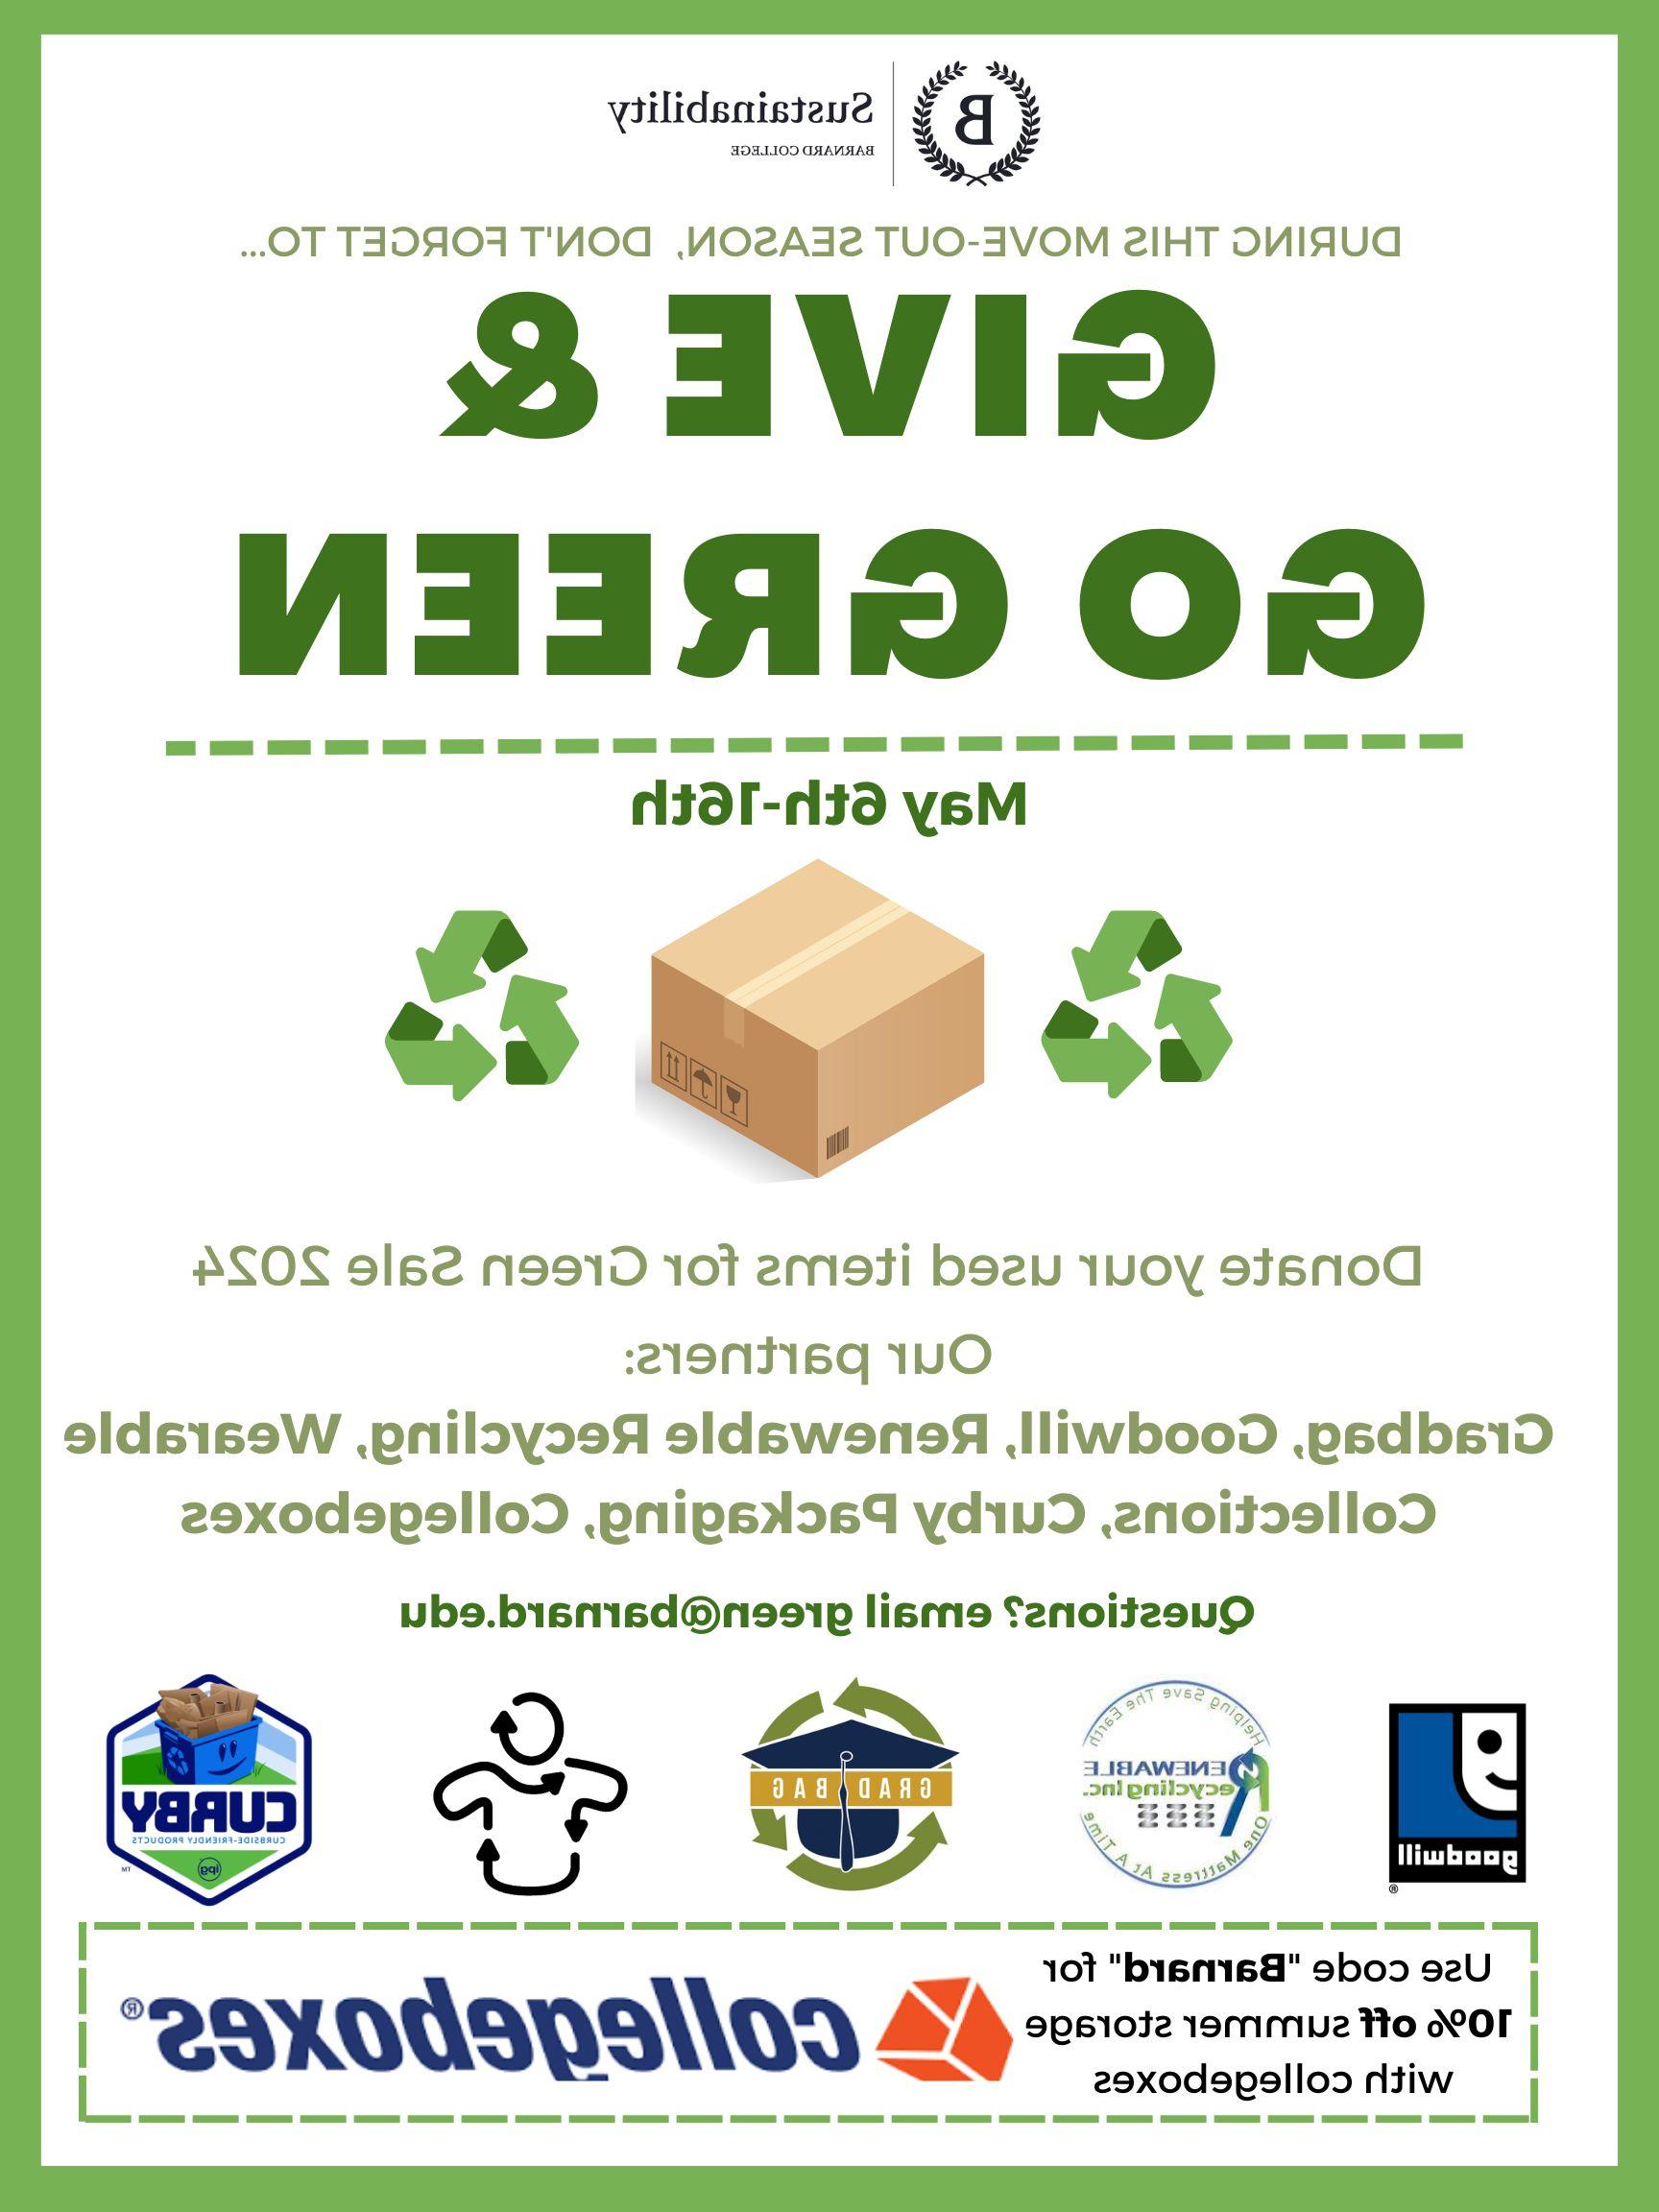 A flyer promoting the give and go green initiative accepting donations from May 6-16